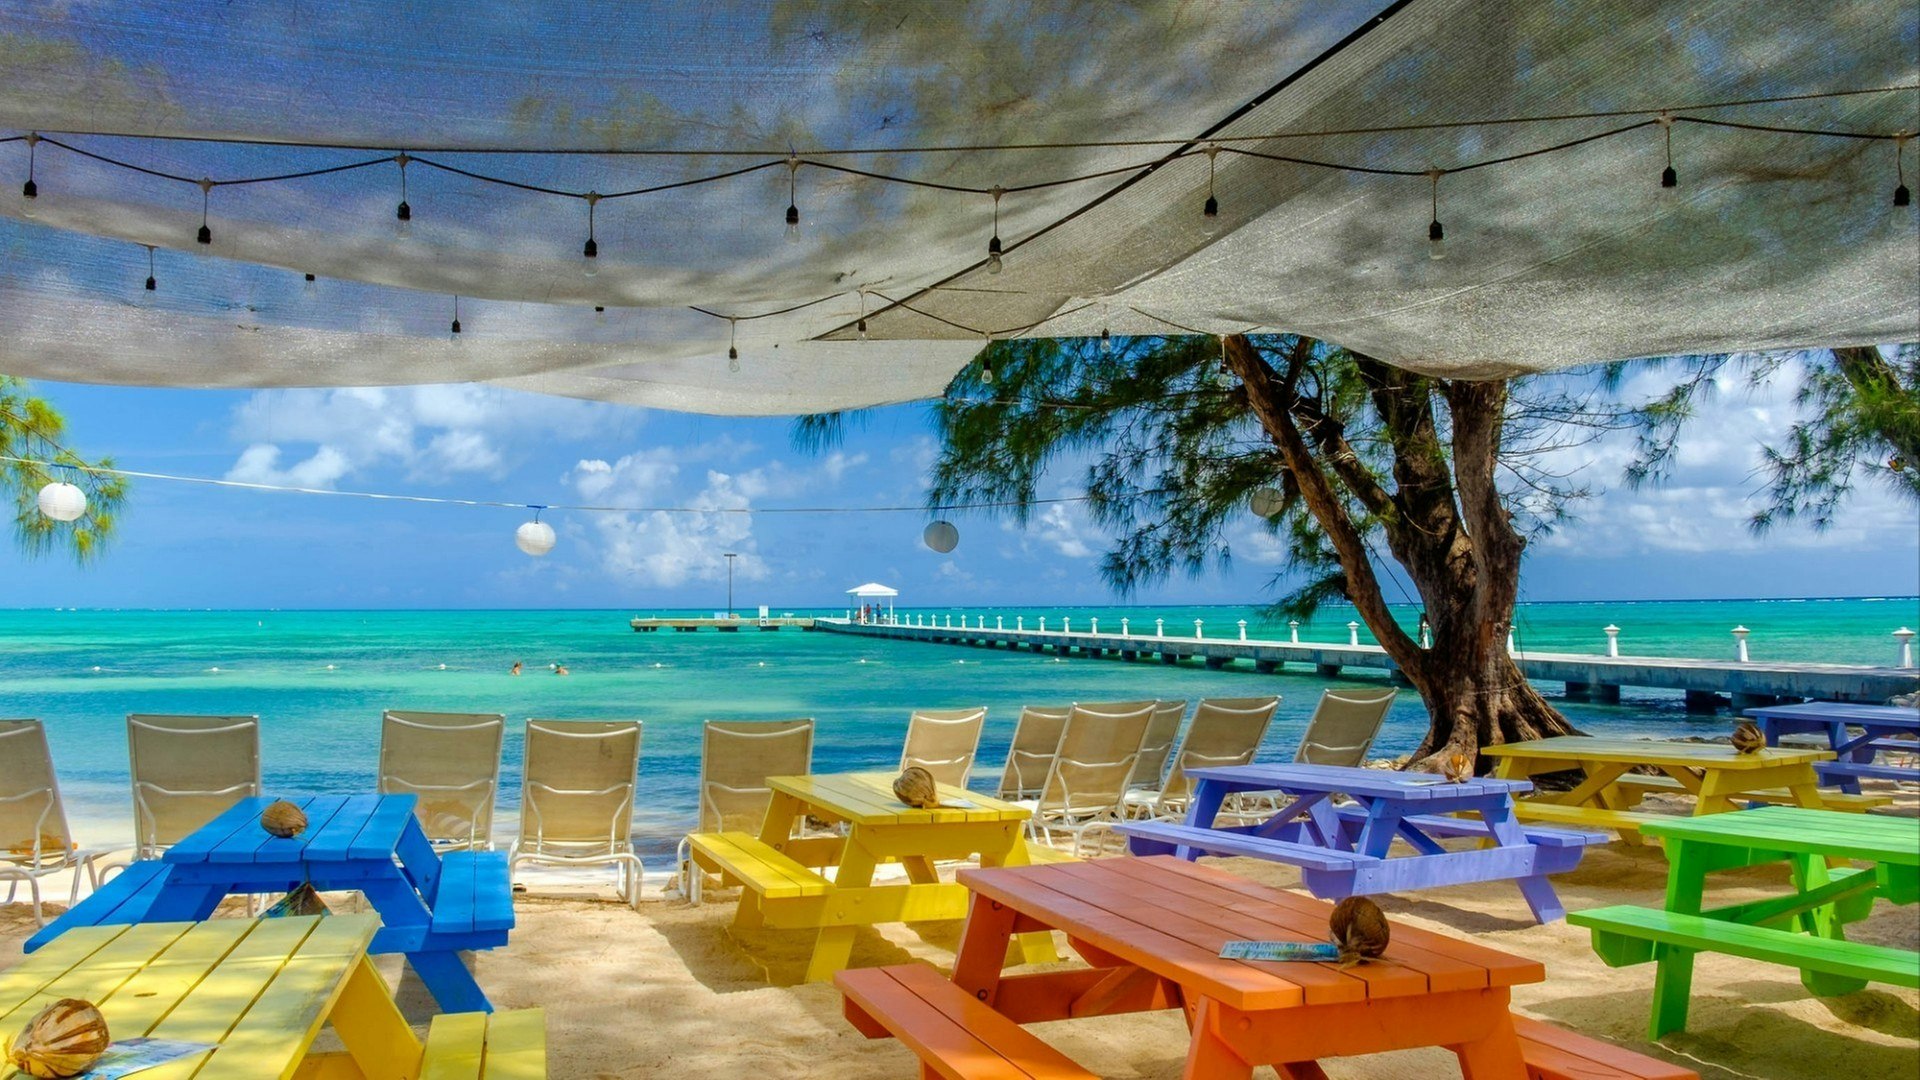 View of the Caribbean Sea from wooden colored tables on the beach at Rum Point